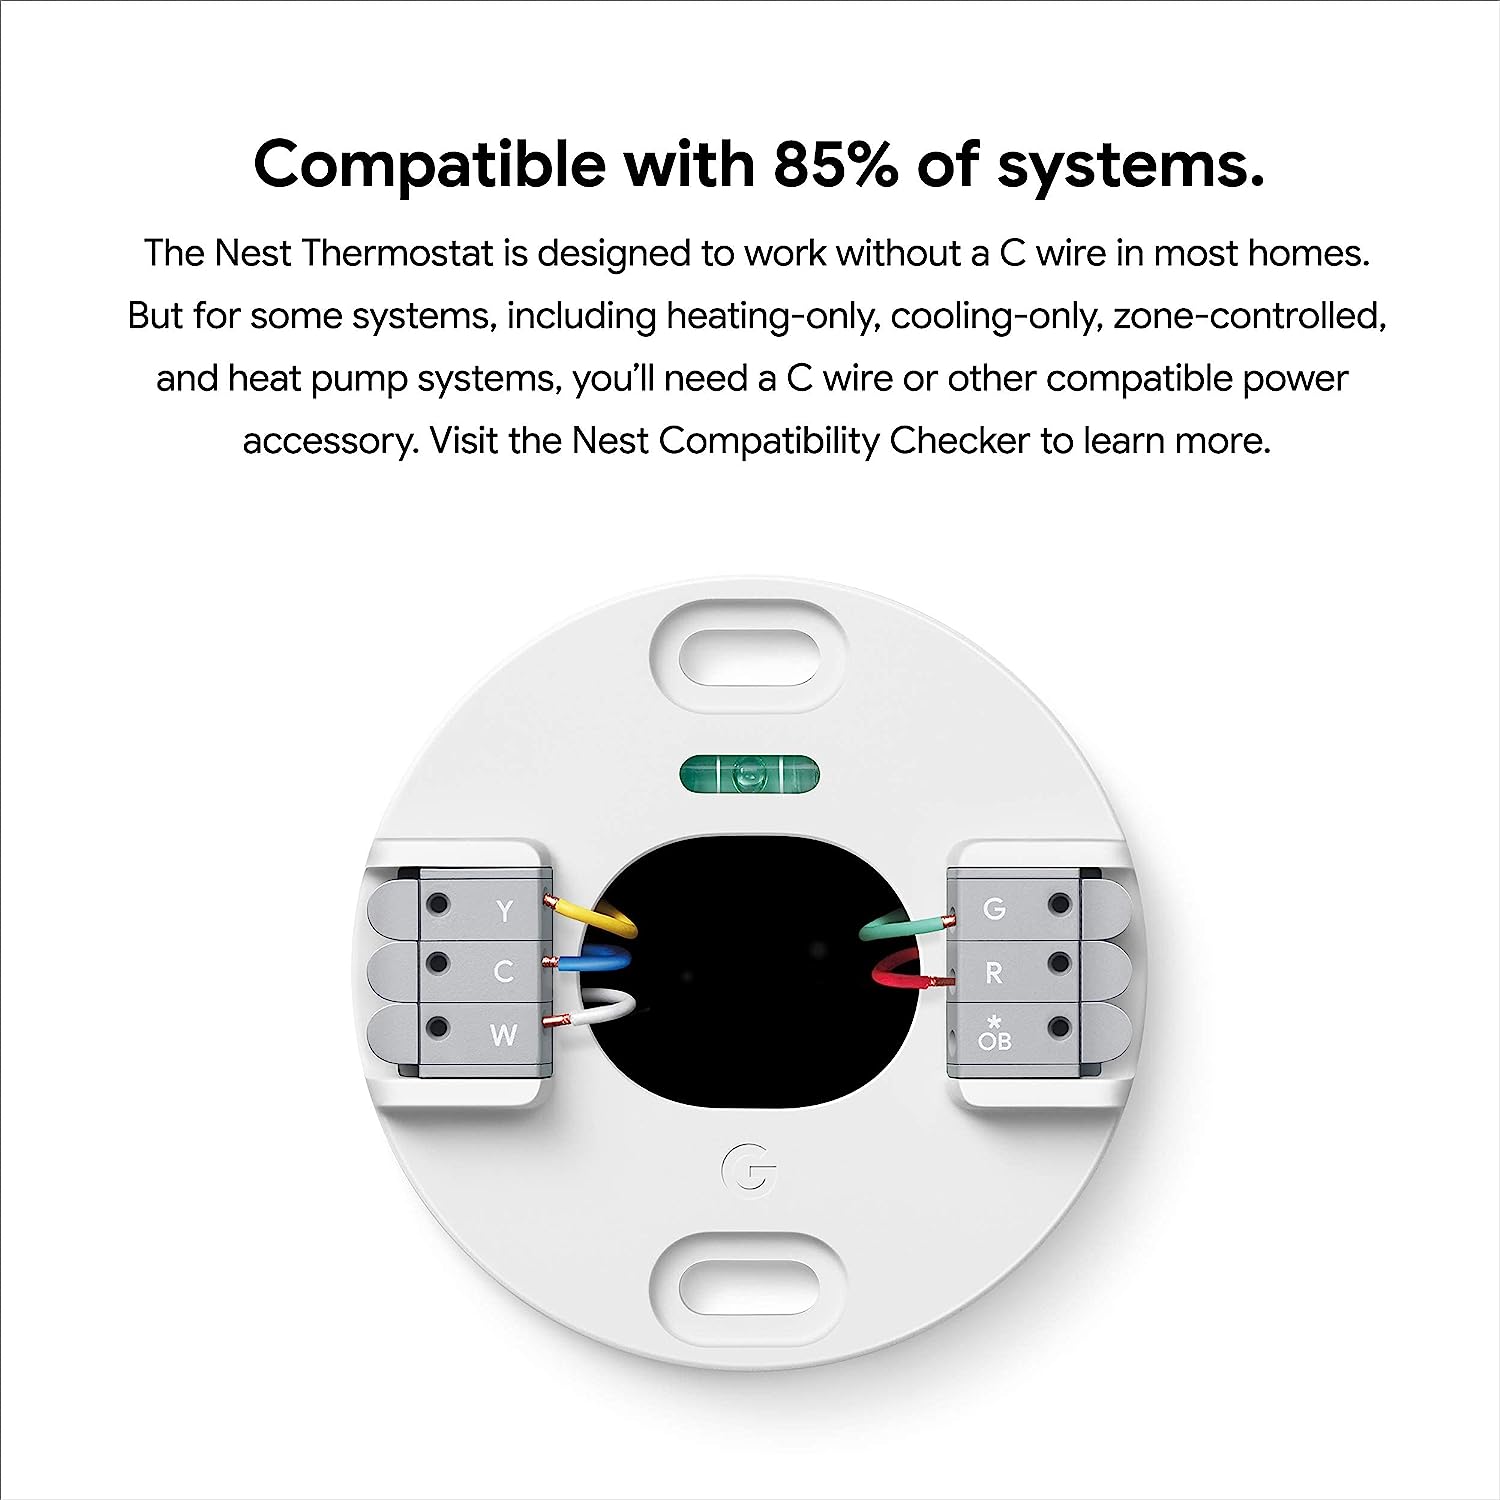 Google Nest Thermostat - Smart Thermostat for Home - Programmable Wifi Thermostat - Snow (Renewed)